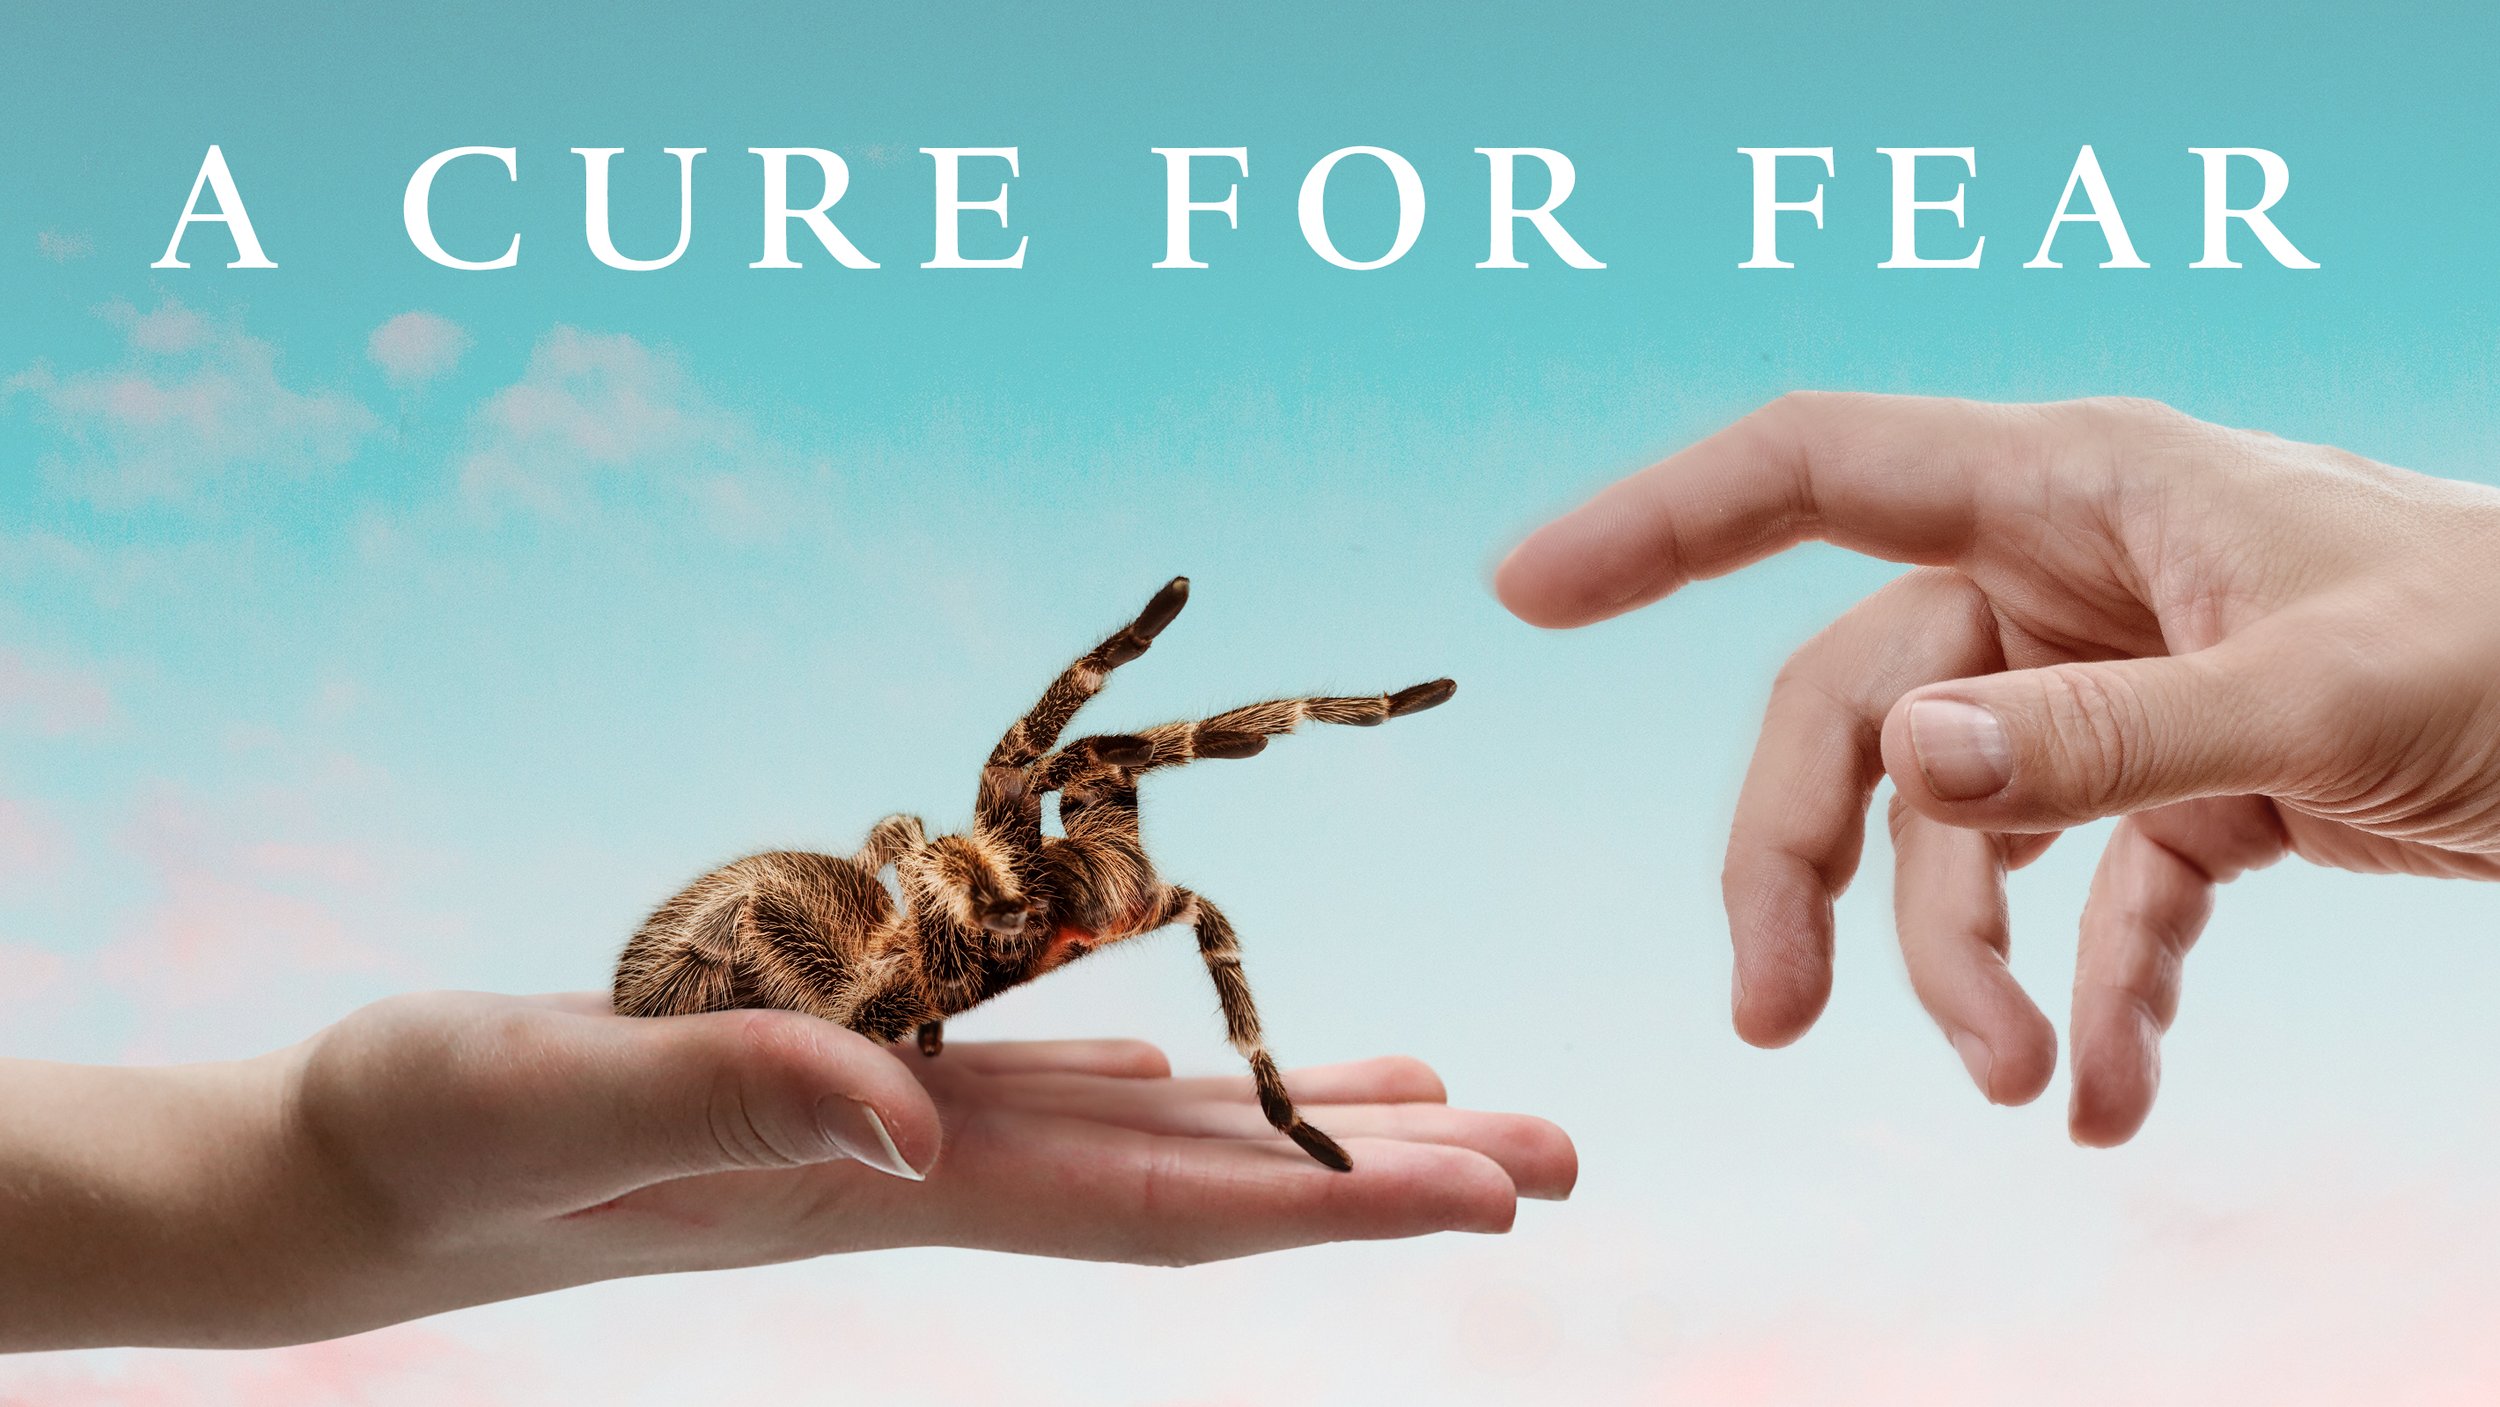 A_Cure_For_Fear_Banner_2840x1598.jpg